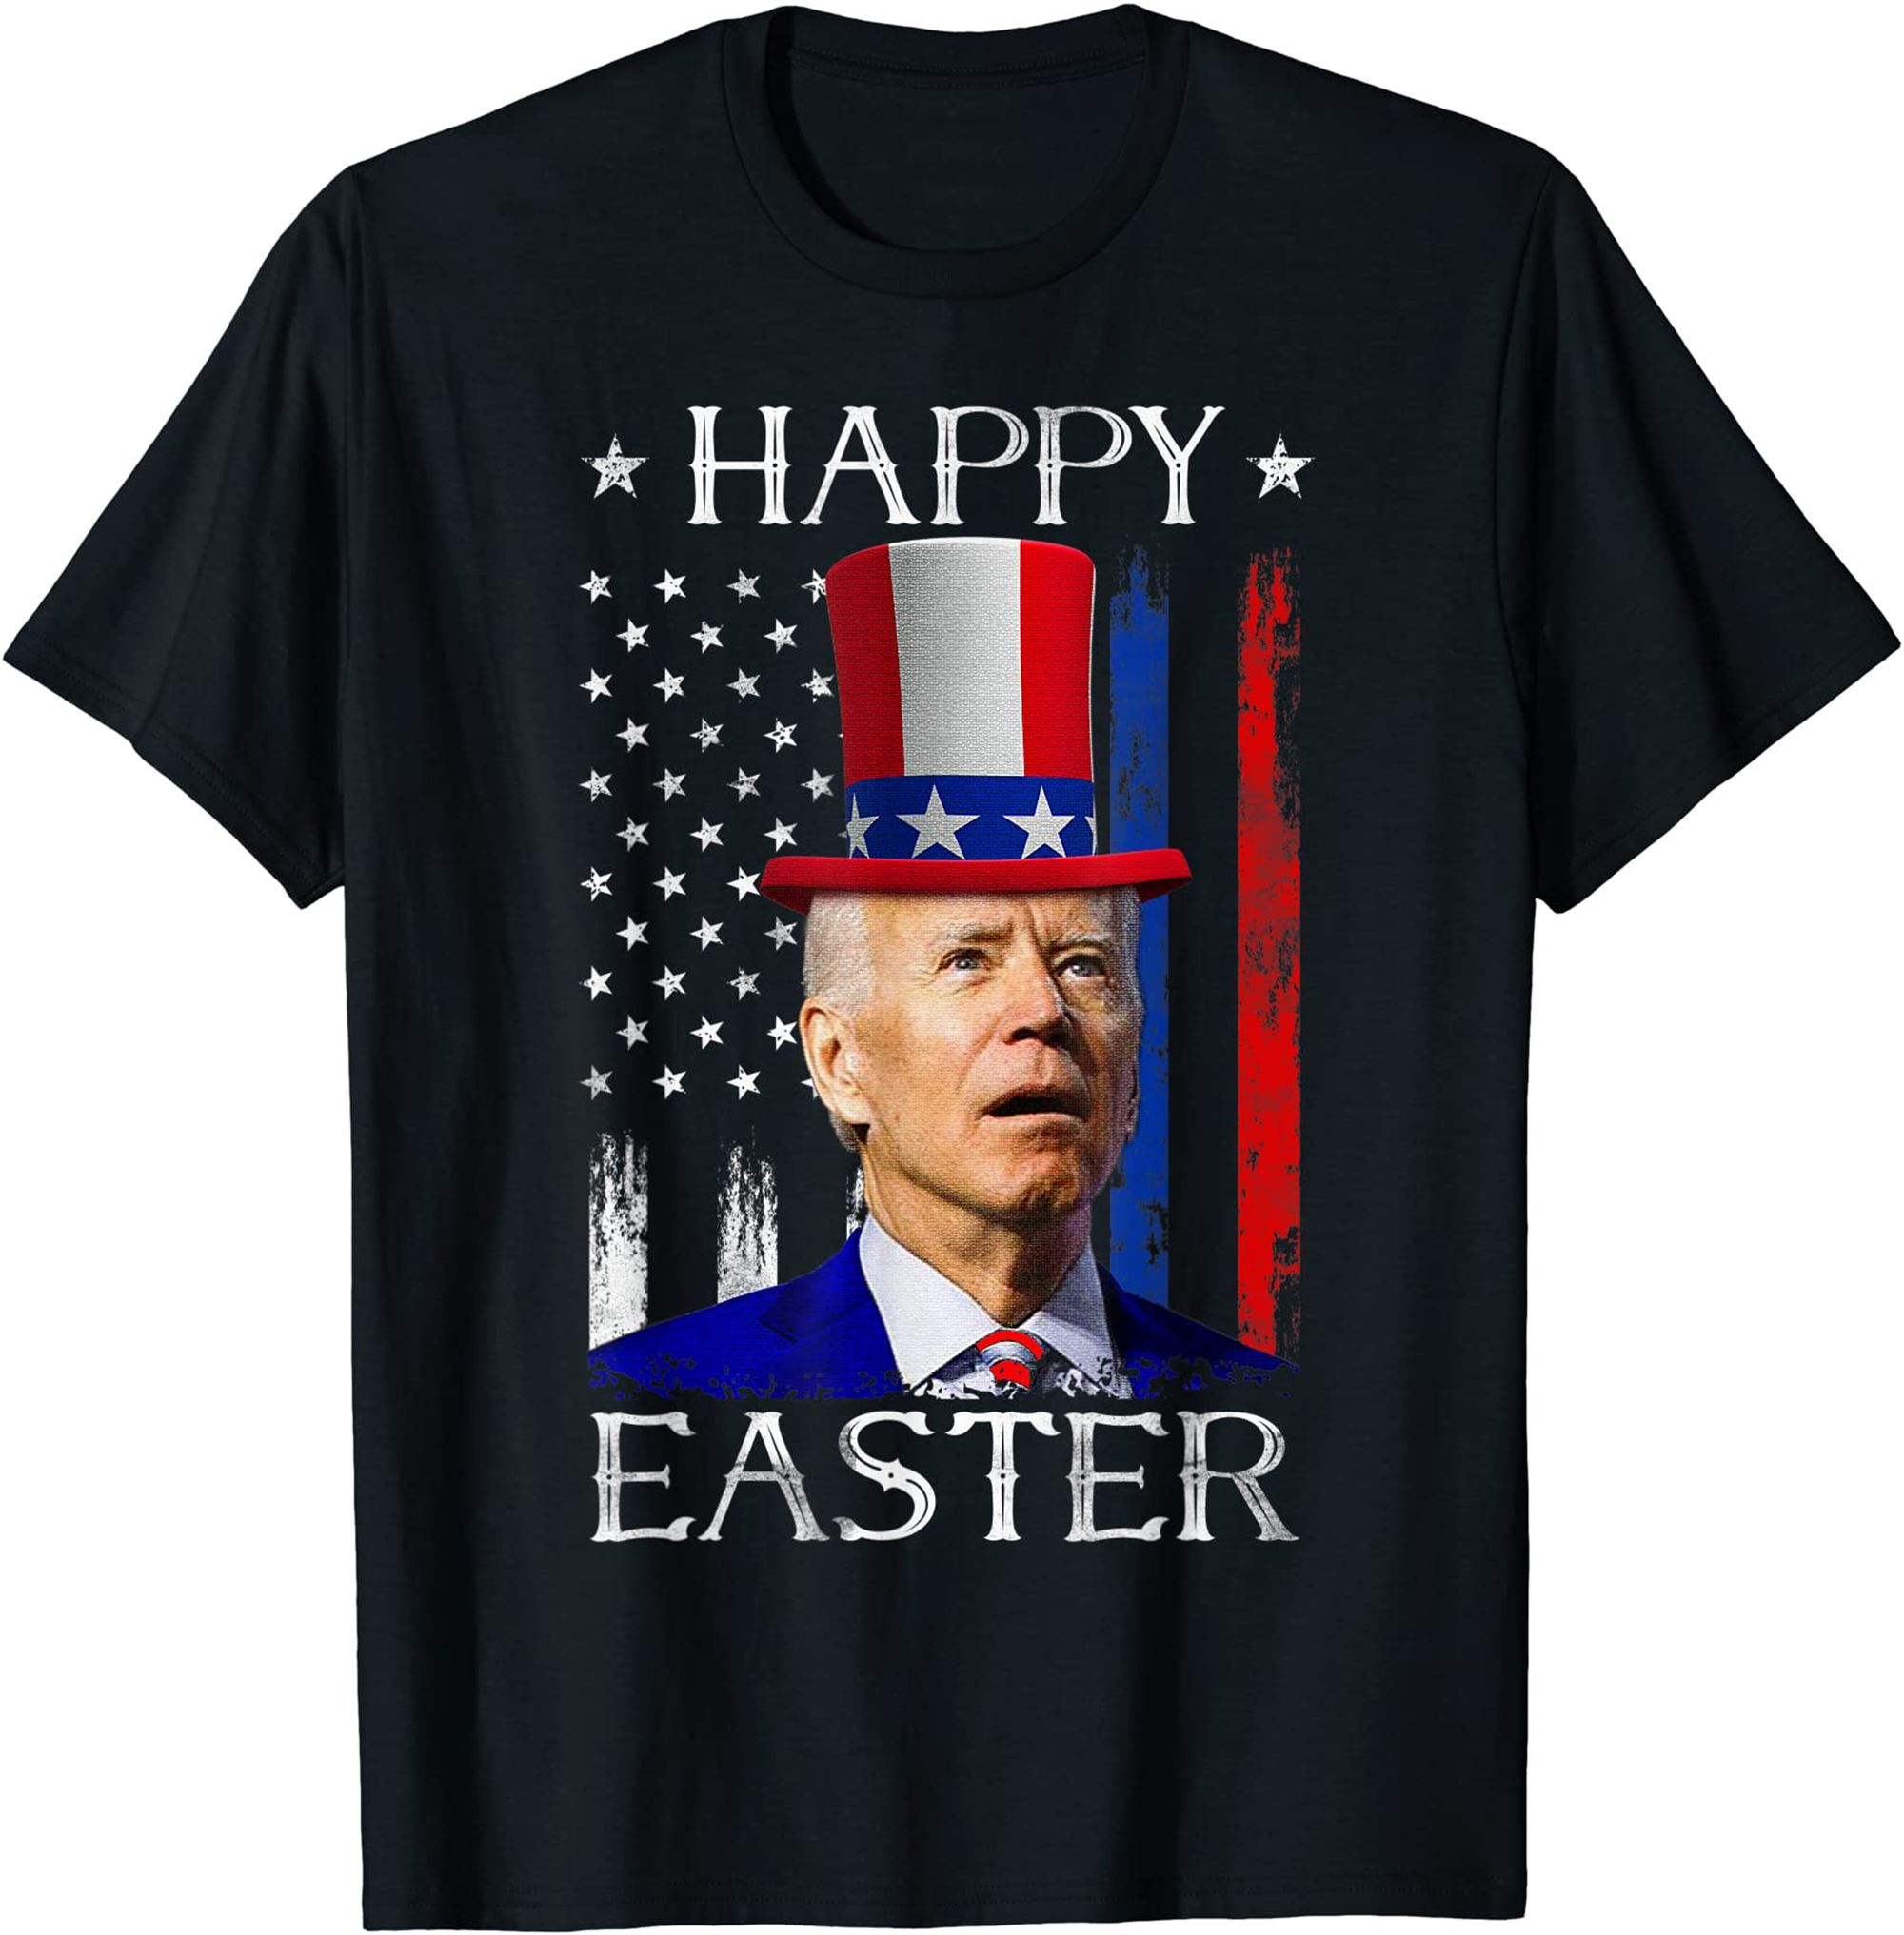 Happy Easter Joe Biden Confused 4th Of July Independence Day T-shirt Full Size Up To 5xl